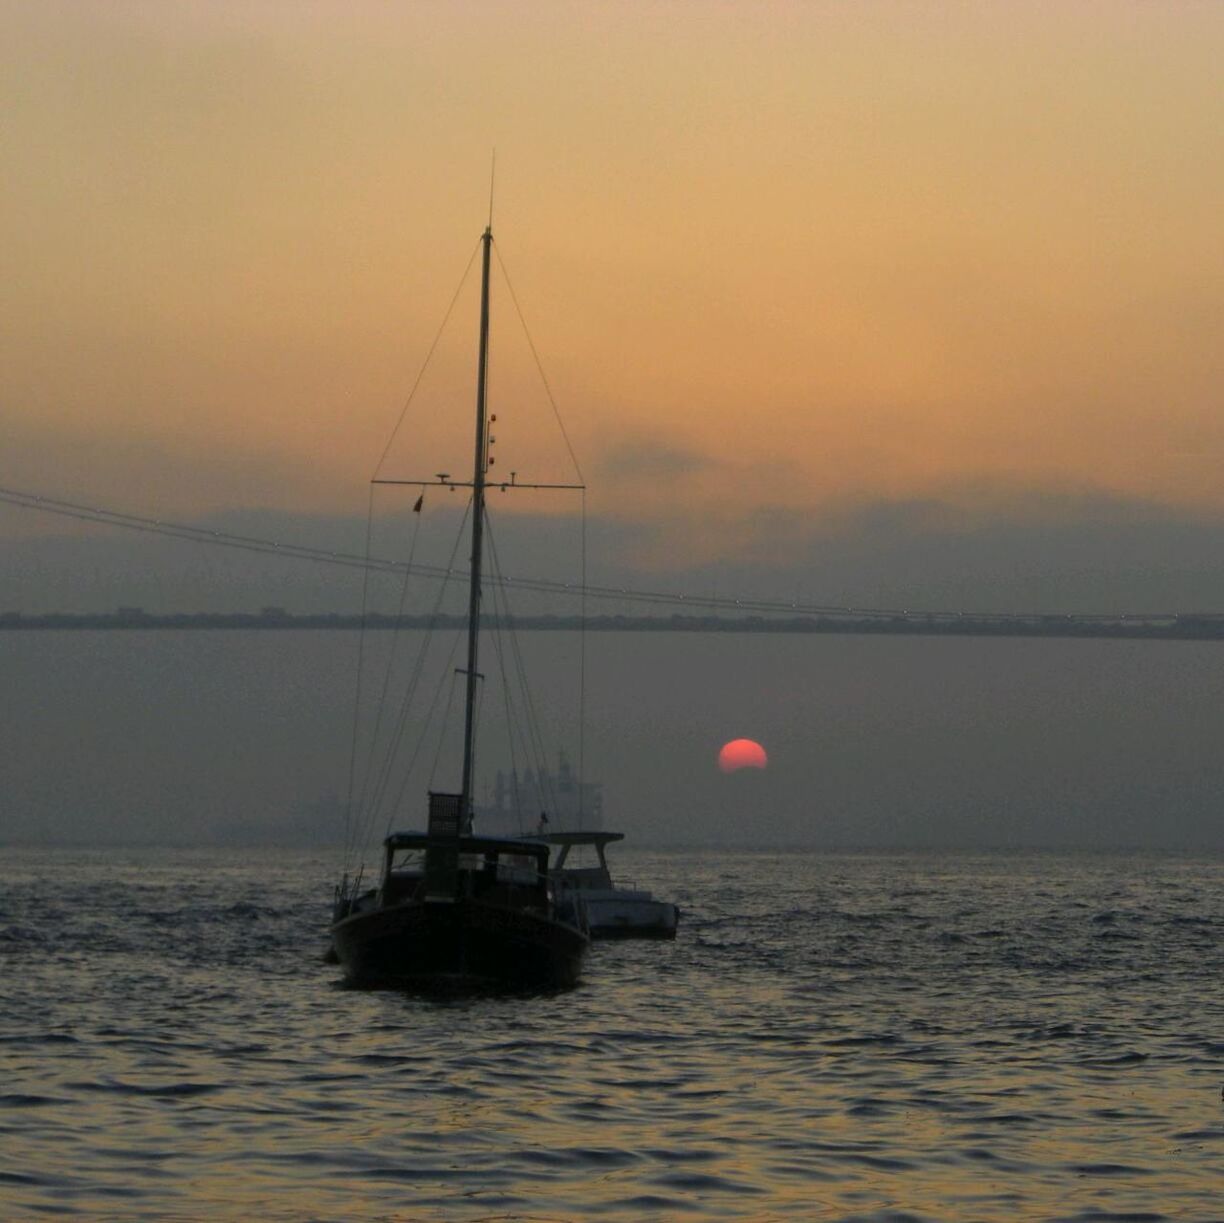 Scenic view of boat in sea against cloudy sky at sunset